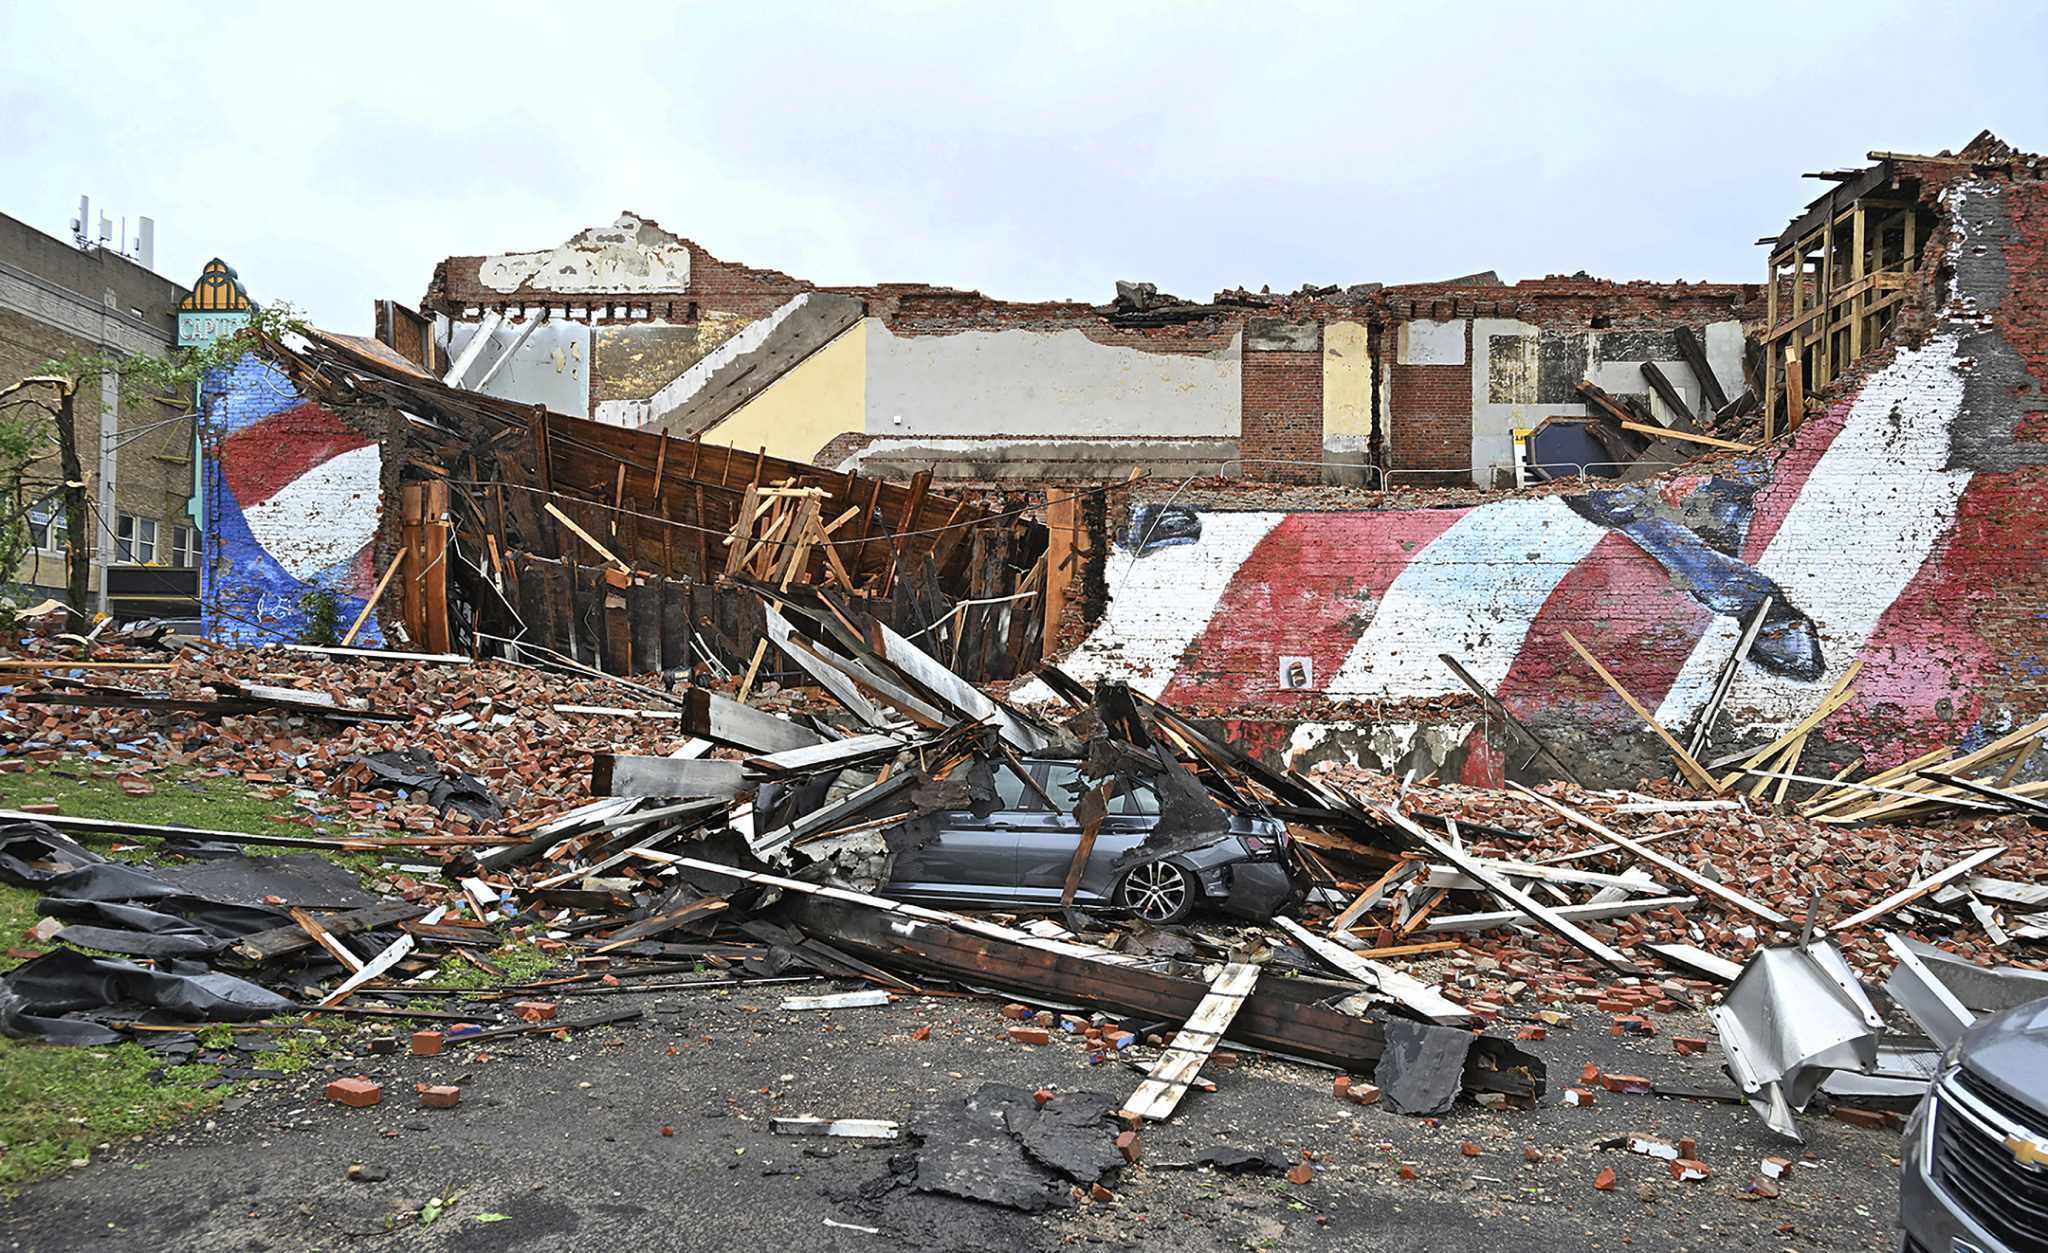 Storms flood the Ozarks and strand drivers in Toronto. New York town is devastated by tornado